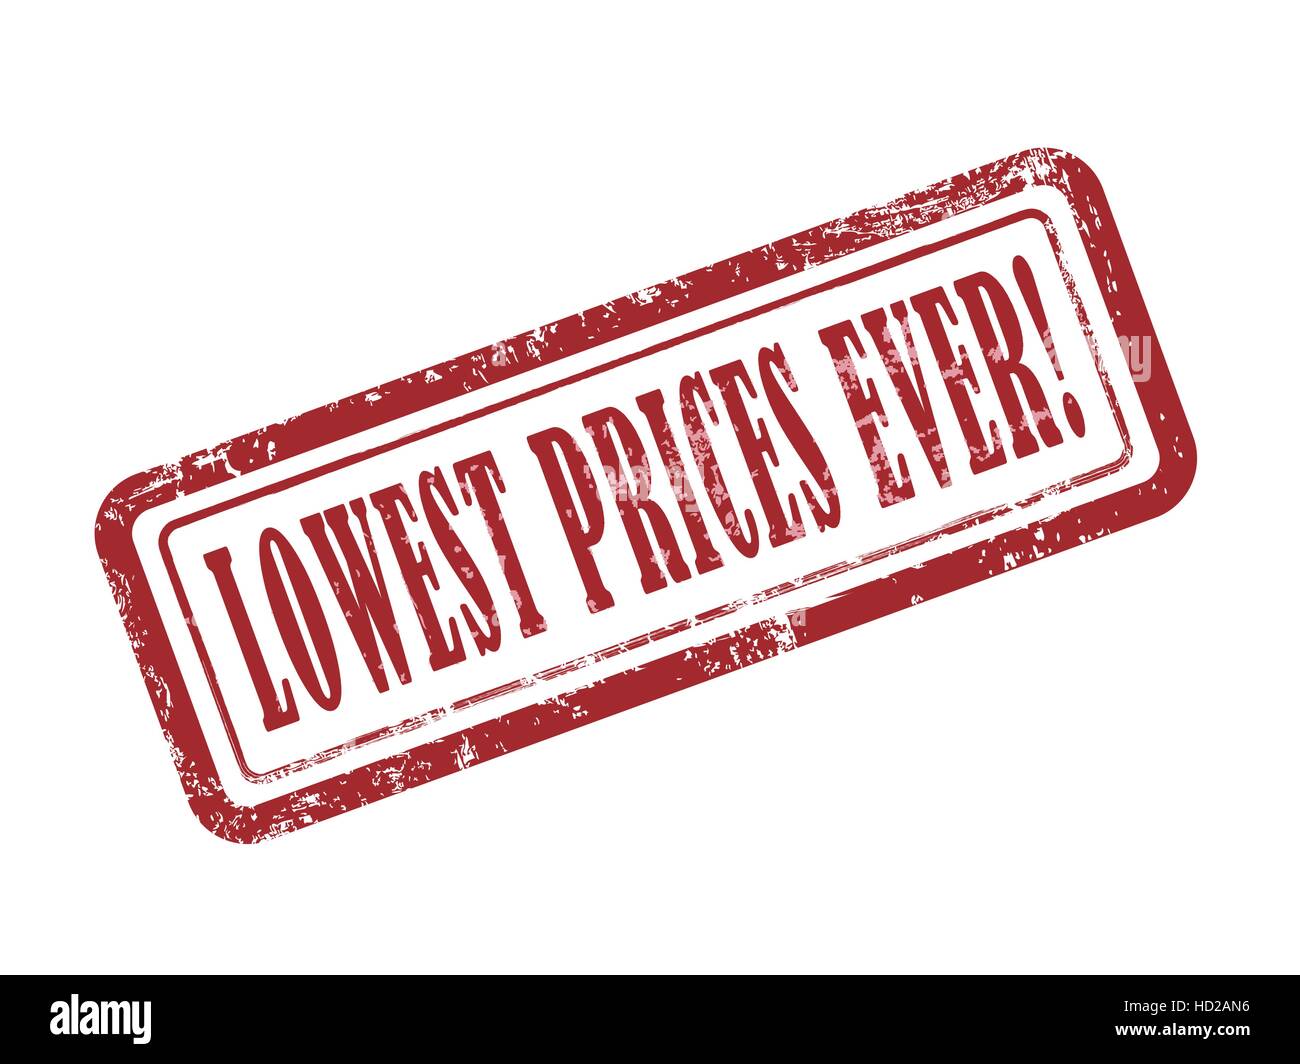 stamp lowest prices ever in red over white background Stock Vector